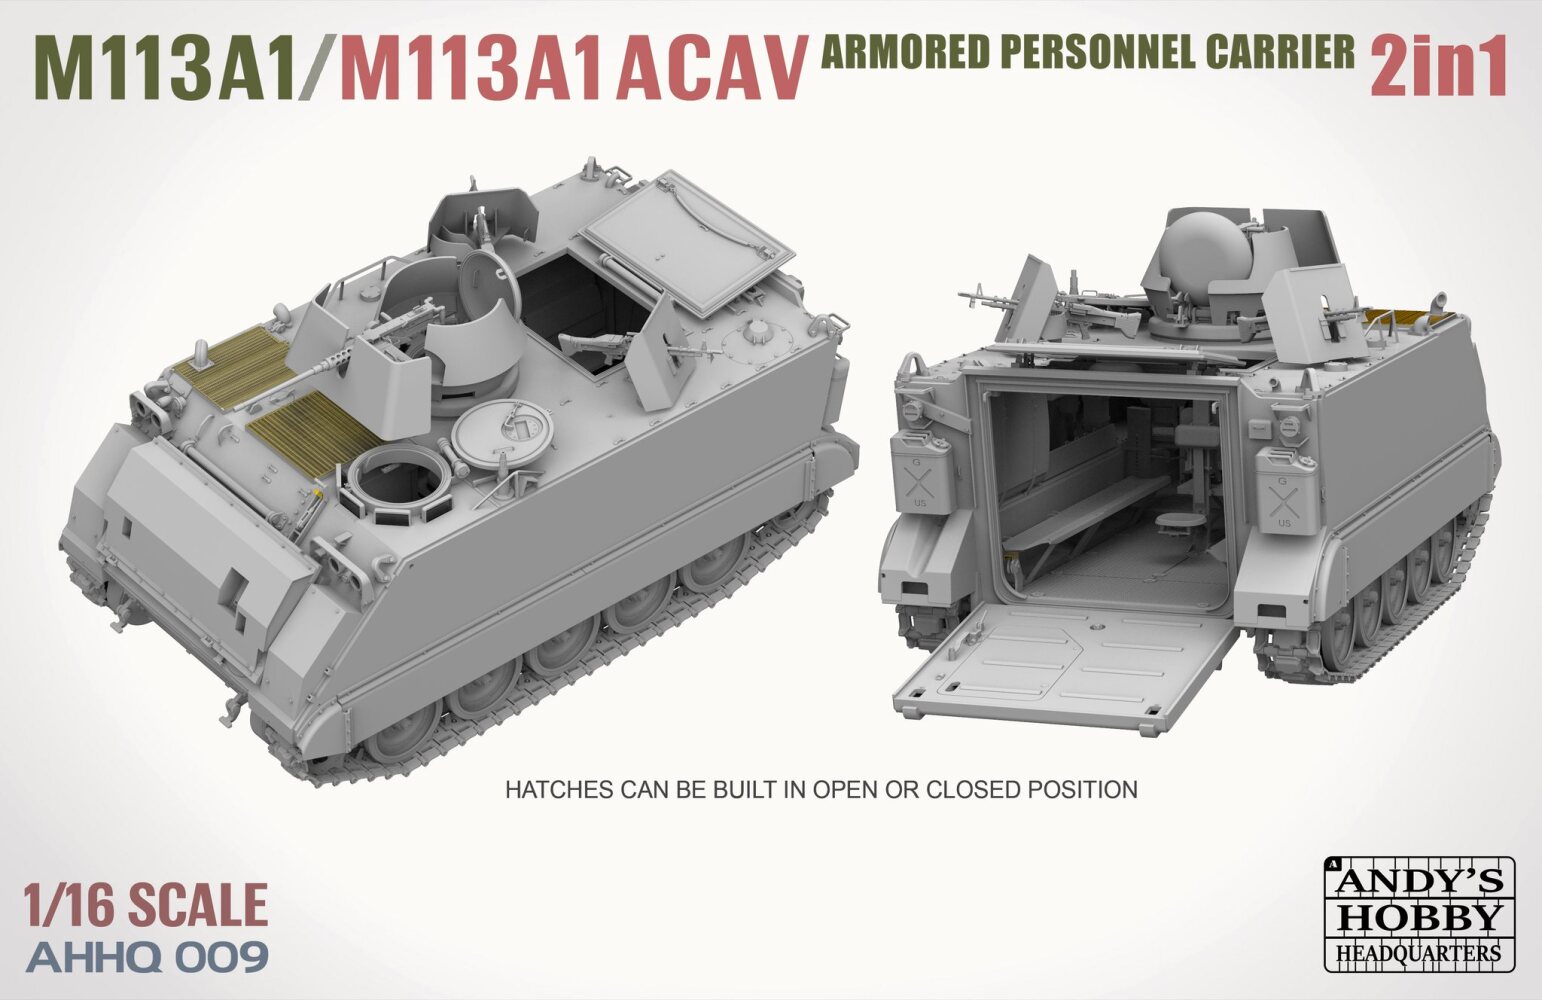 M113A1/M113A1 ACAV Armoured Personnel Carrier